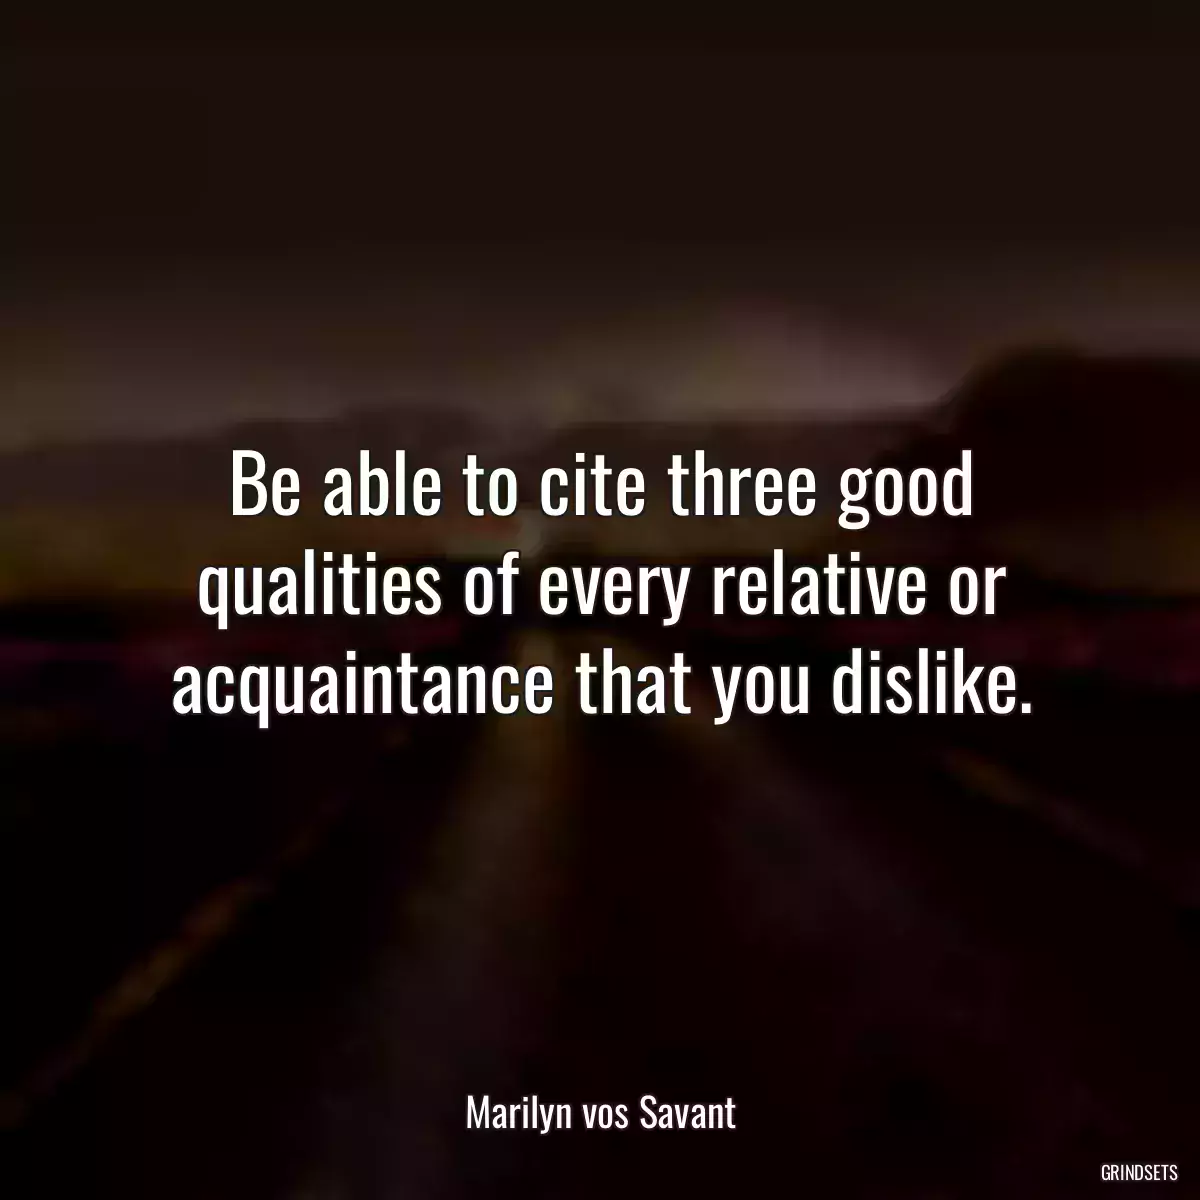 Be able to cite three good qualities of every relative or acquaintance that you dislike.